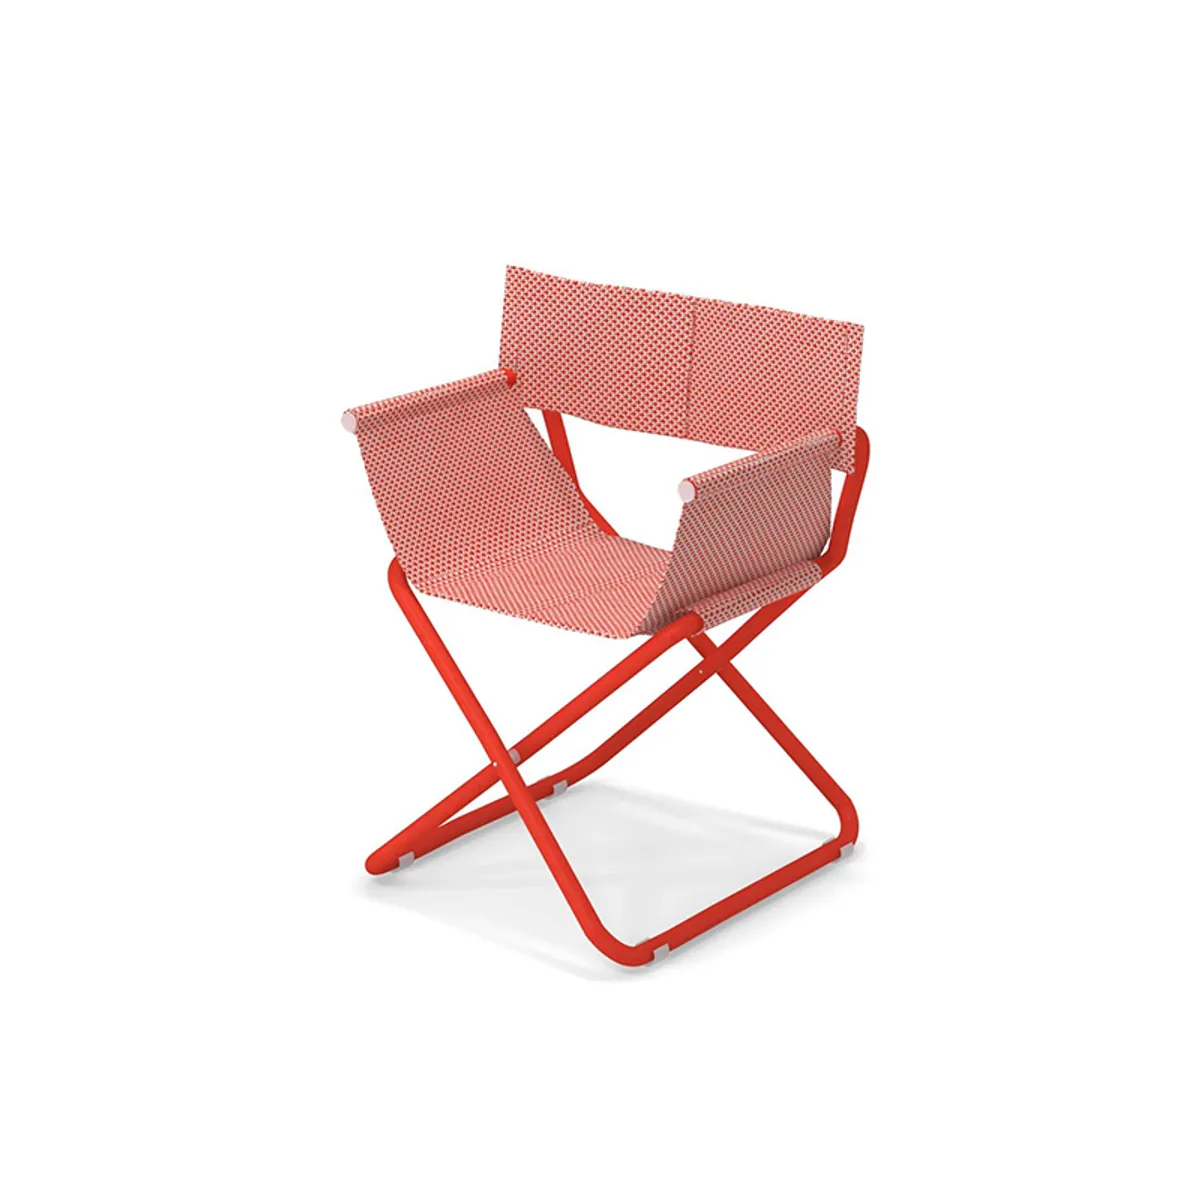 Snooze Folding Chair For Outdoor Areas